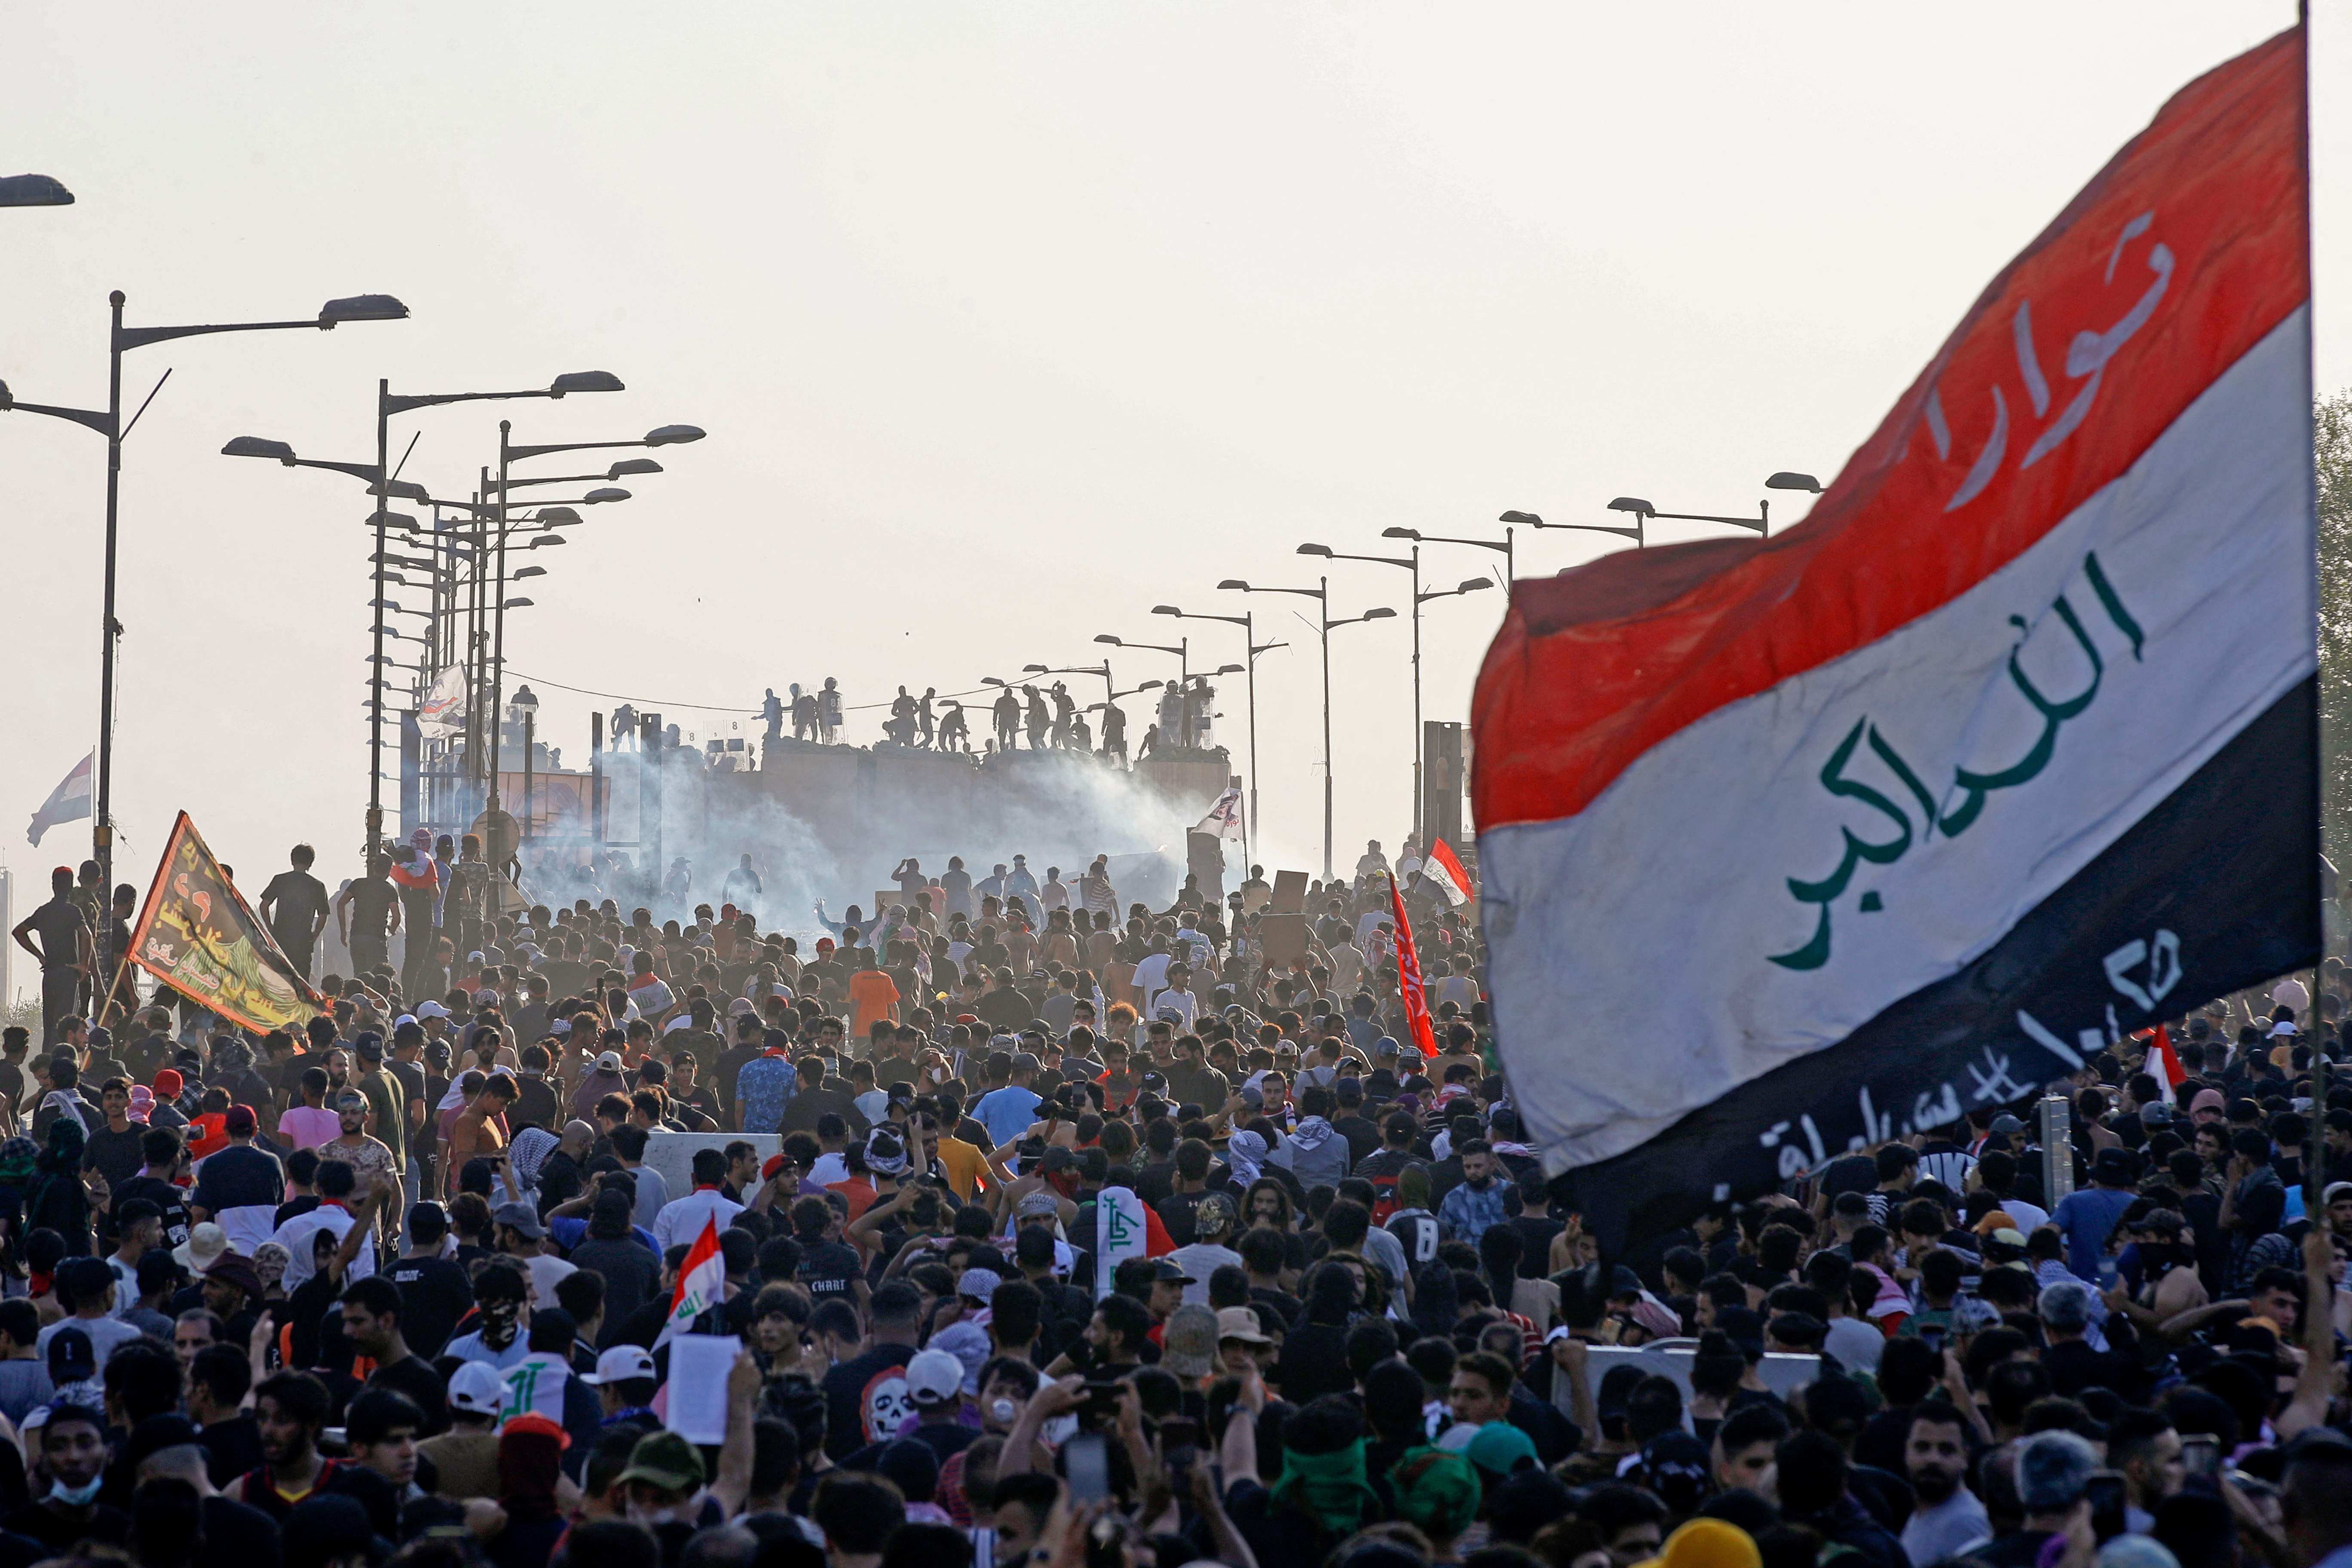 Iraqis mark 3rd anniversary with nationwide anti-corruption protests